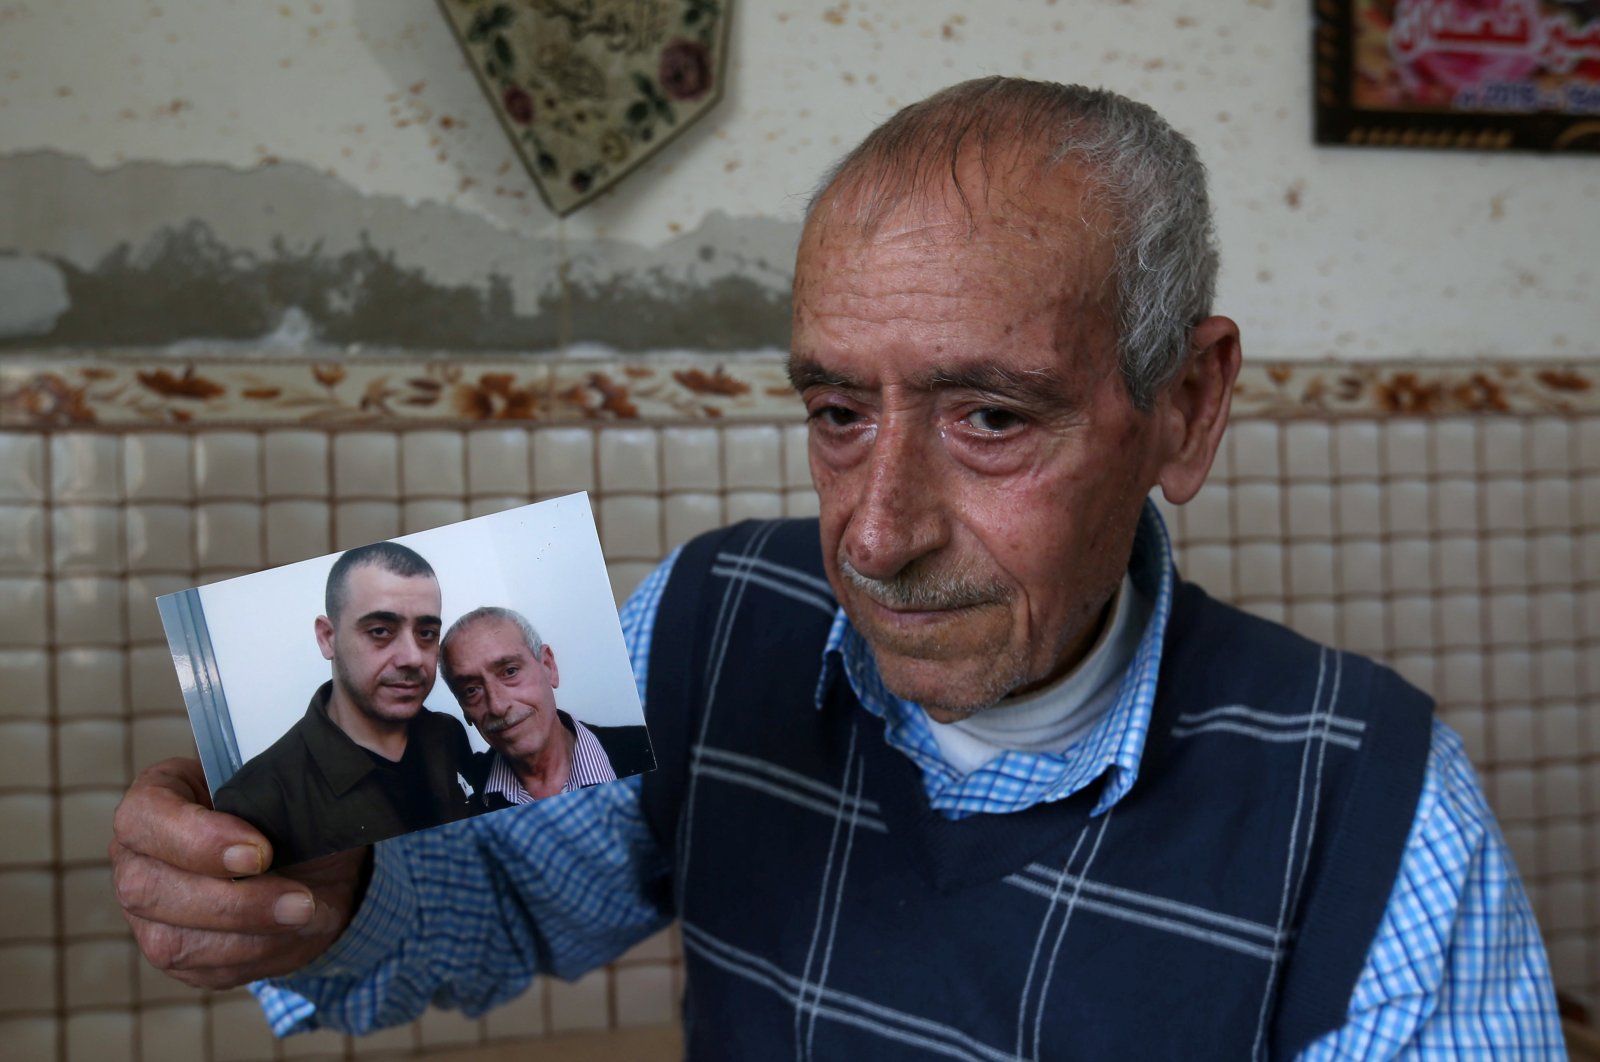 Palestinian man Sameeh Qe'dan, who marks a calendar with a cross to count down the days until his son Abdel-Raouf is released from an Israeli jail, shows a picture of him with Abdel-Raouf, in his home in Rafah in the southern Gaza Strip July 14, 2020. (Reuters Photo)